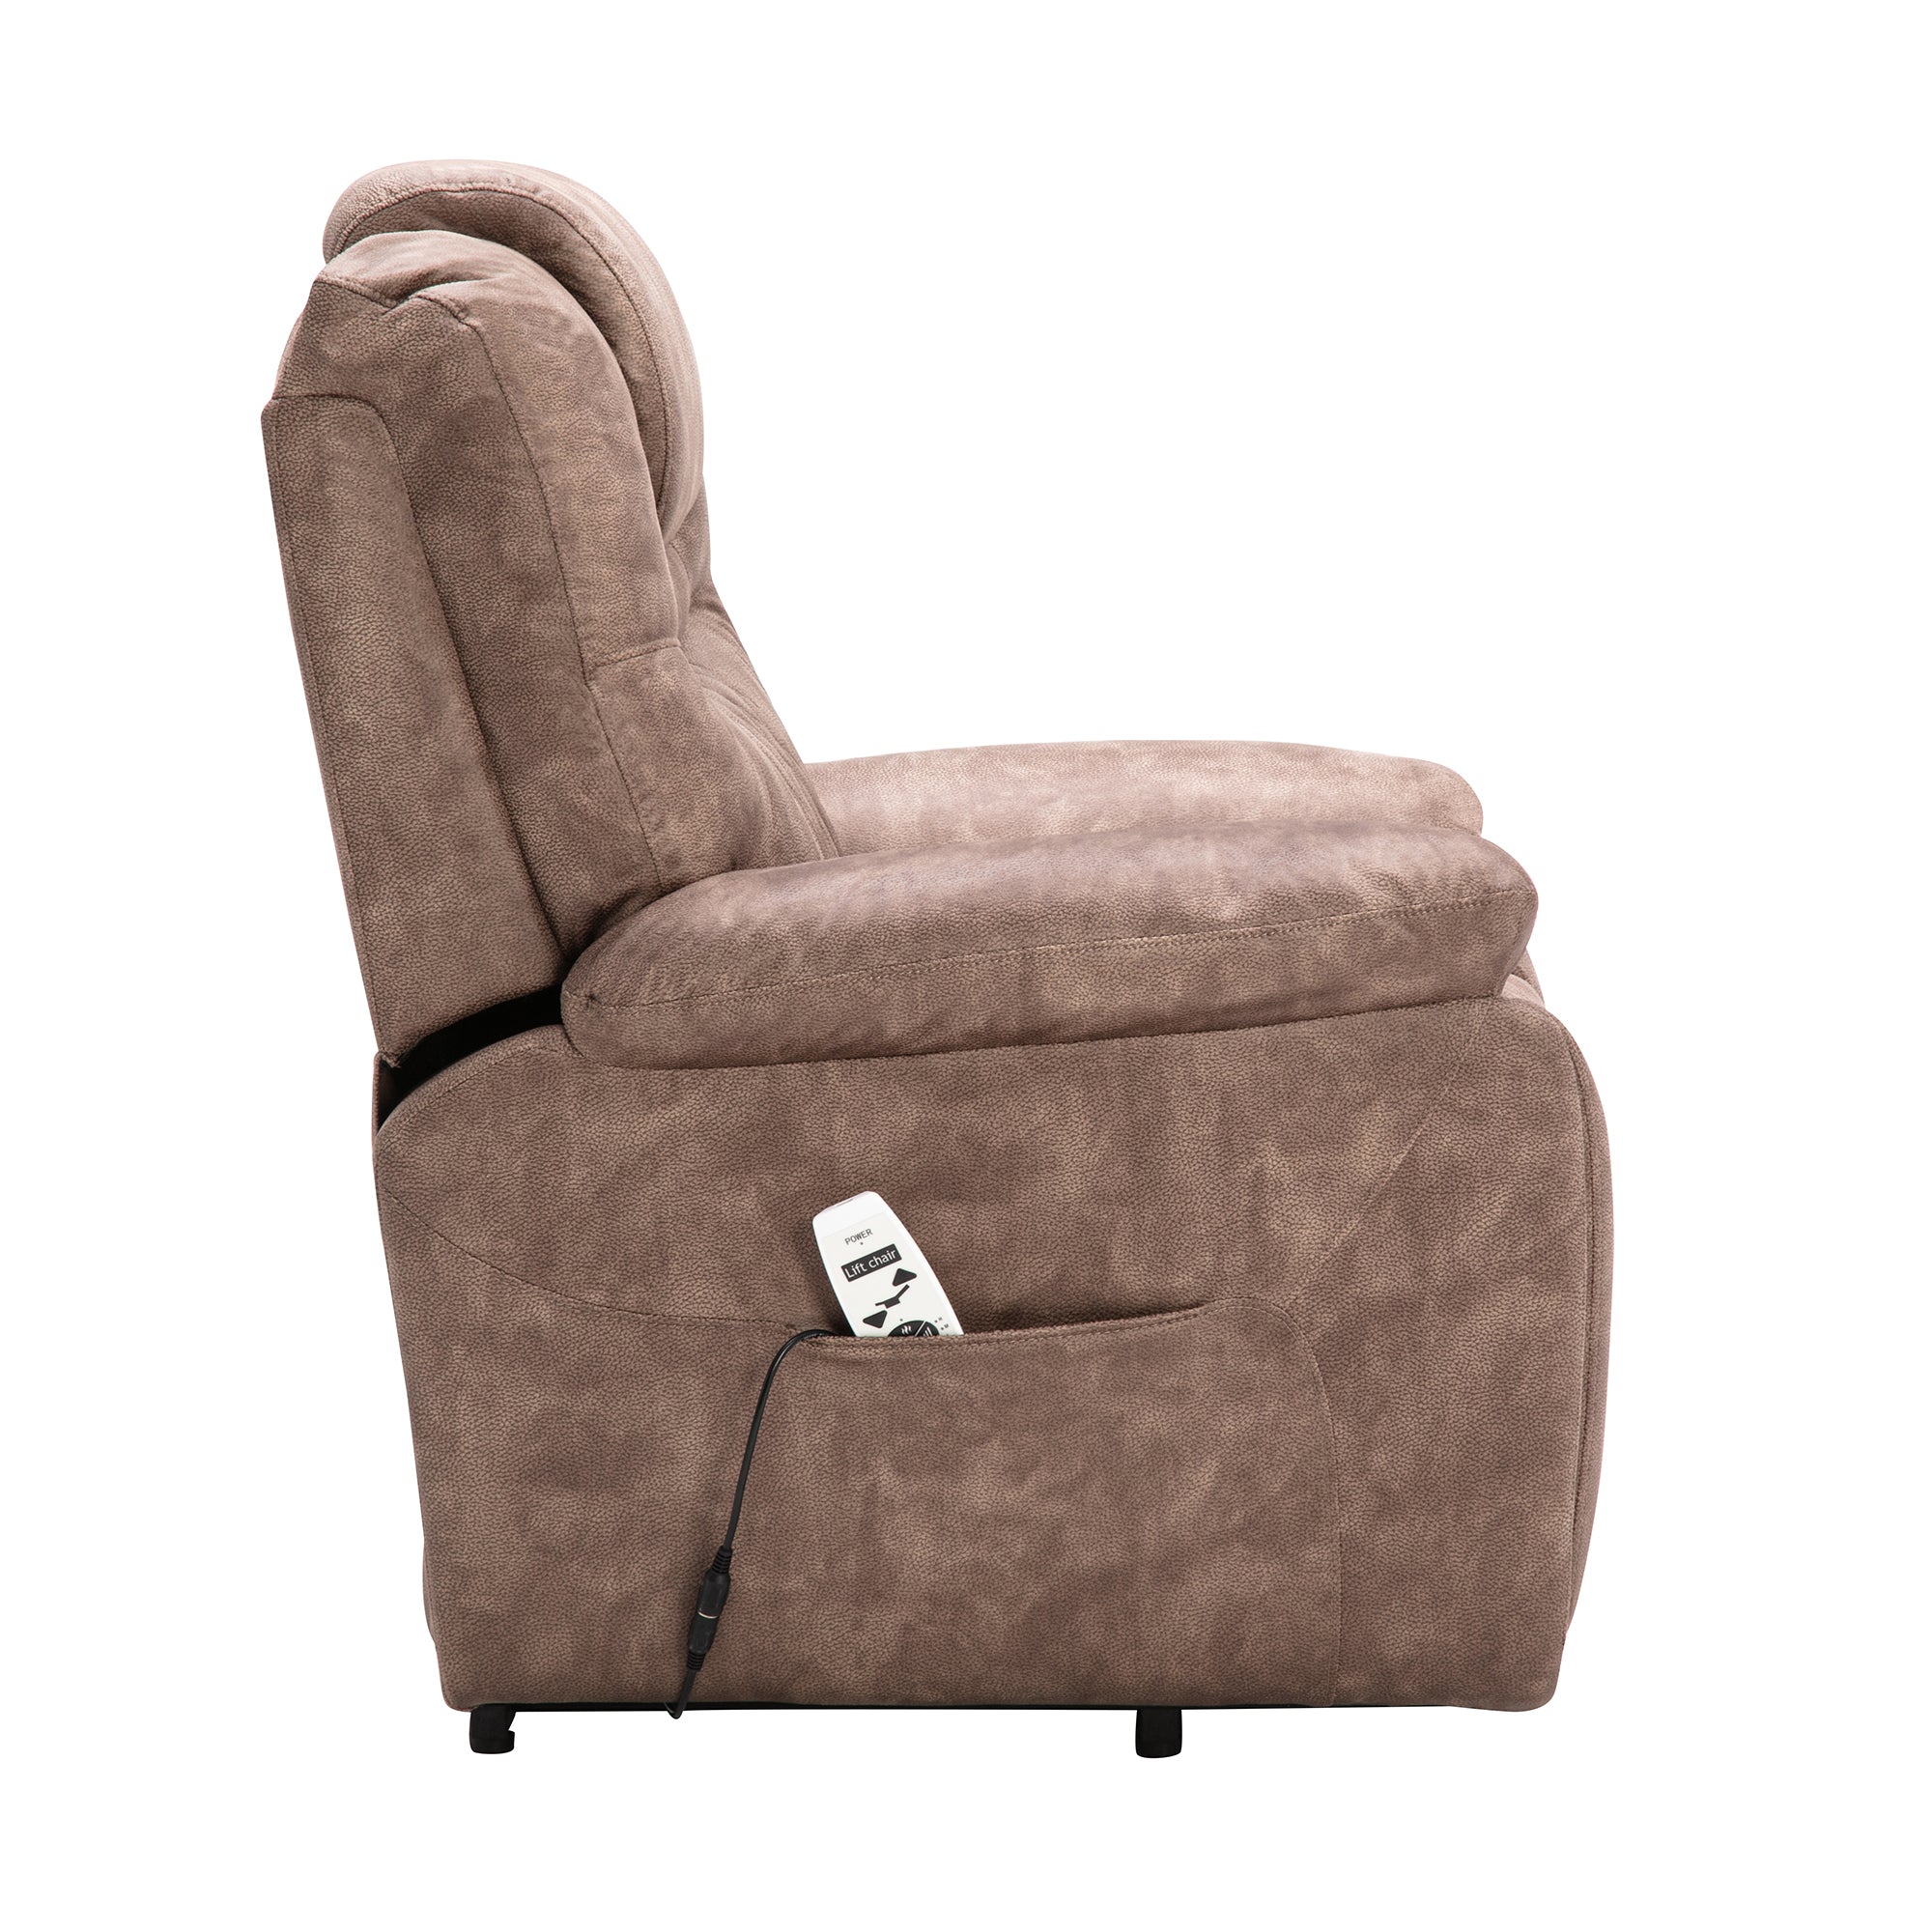 Brown Leather Comfortable Upholstery Power Lift Chair By: Alabama Beds